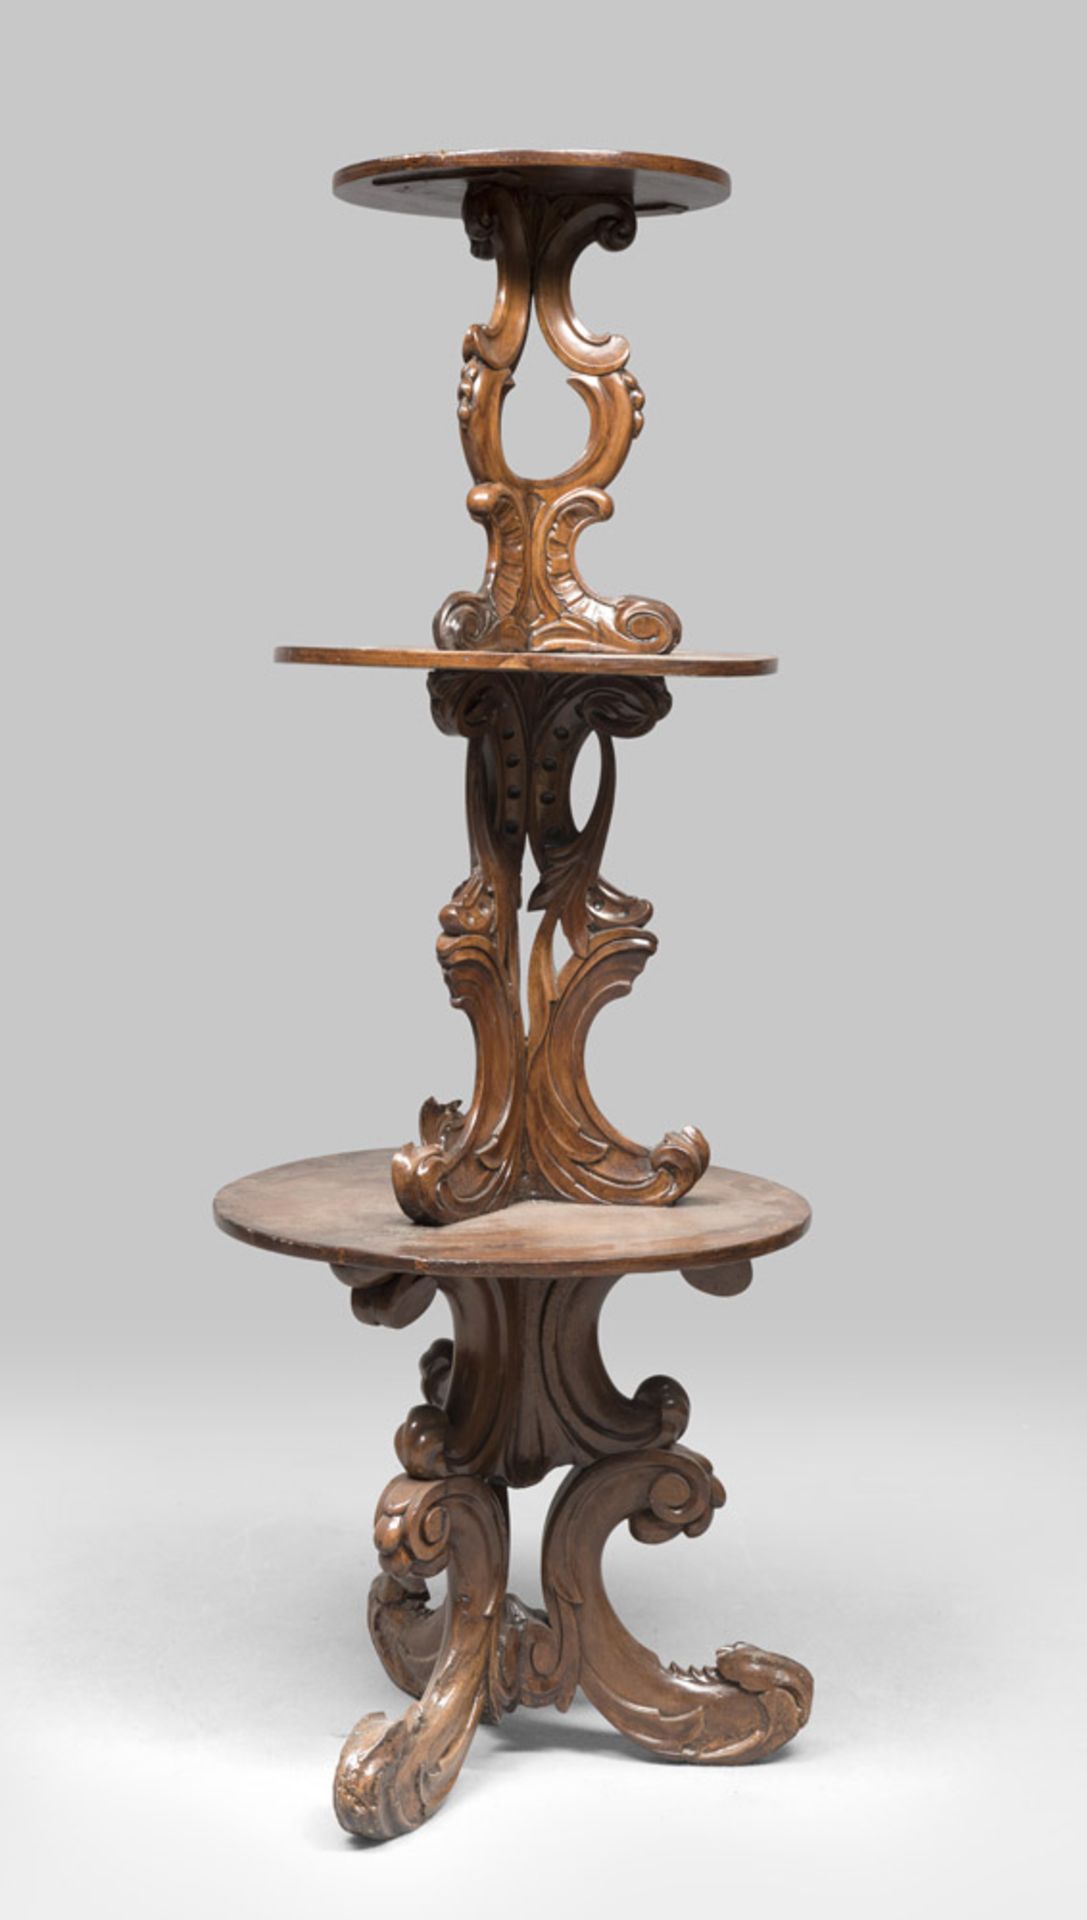 Circular walnut-tree and fir Etagere, 19th century. Measures cm. 167 x 68.ETAGERE CIRCOLARE IN